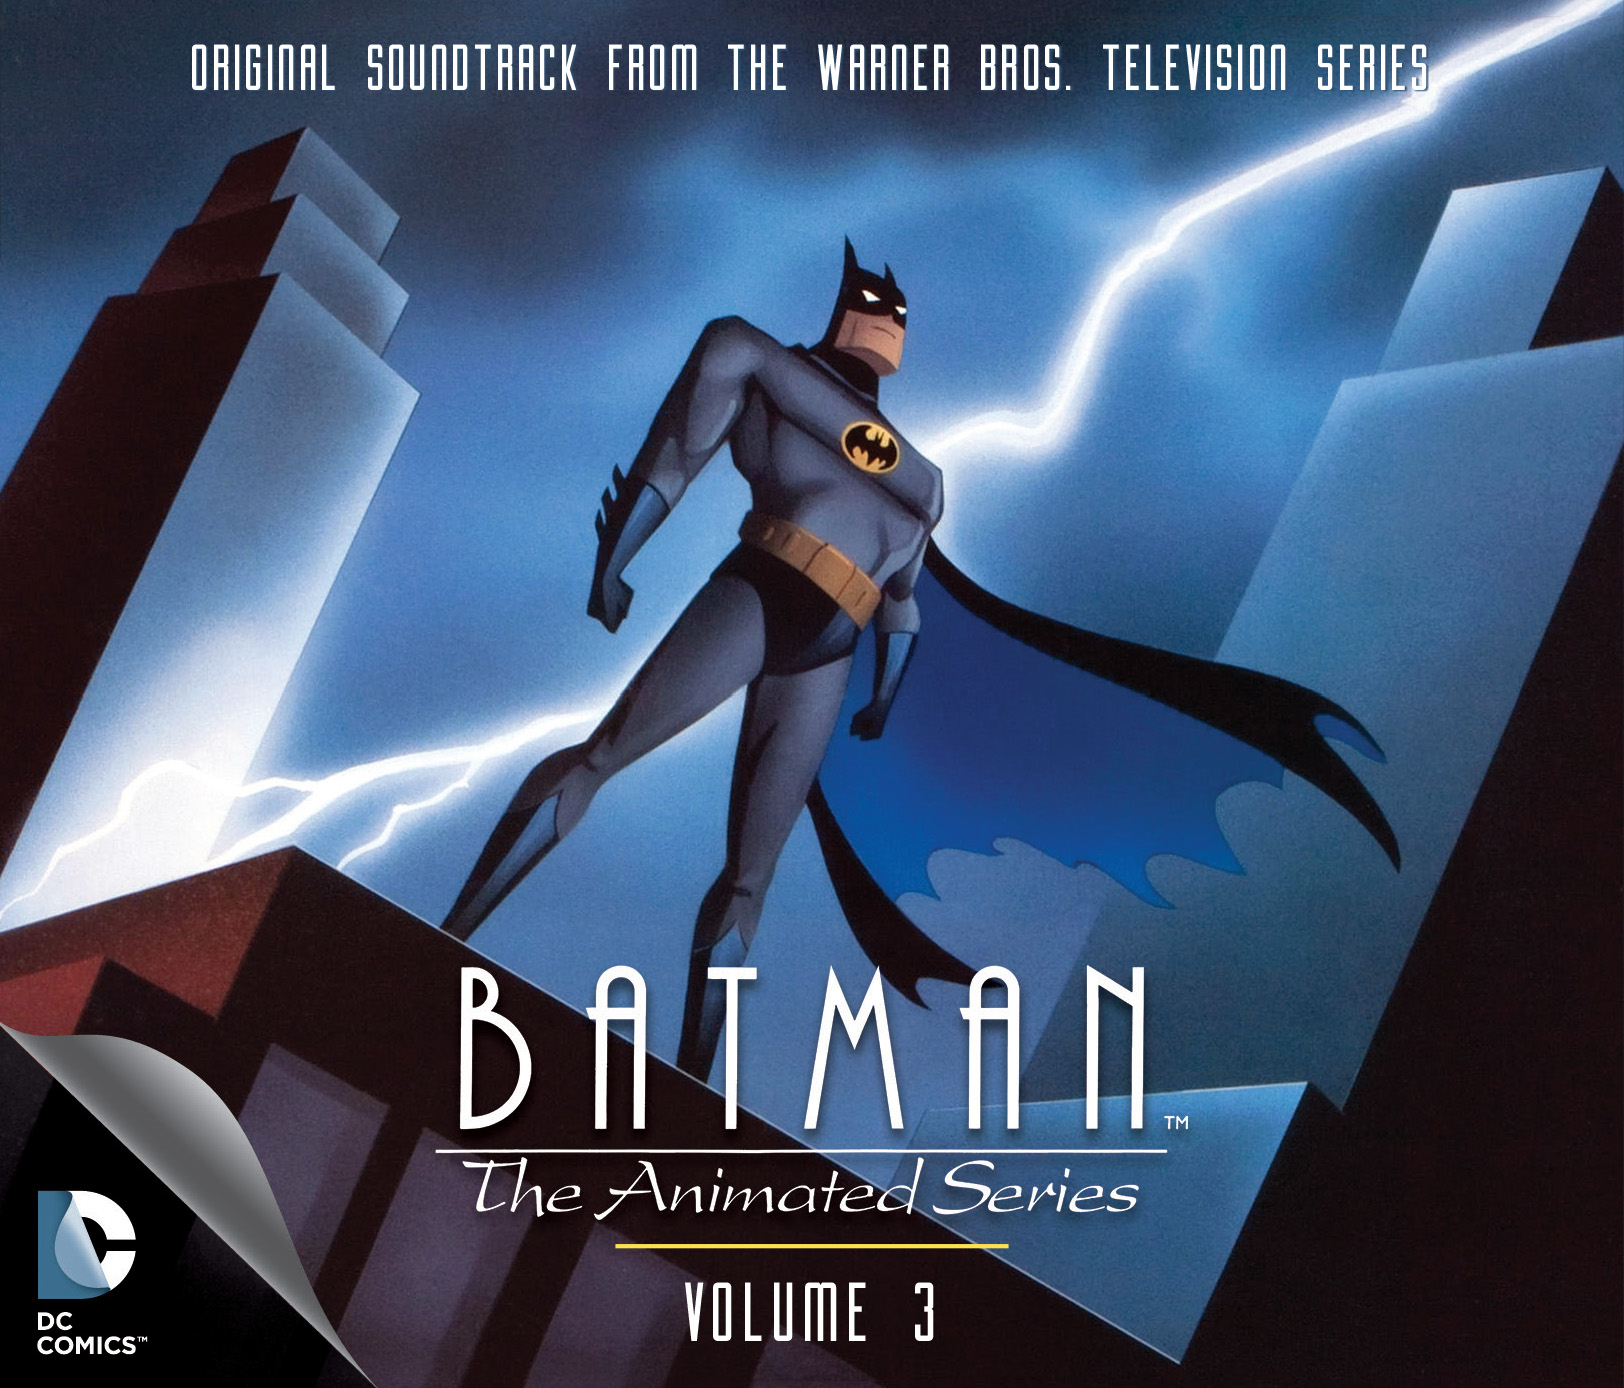 The Batman: The Animated Series Soundtrack, Volume 3 release date and track...